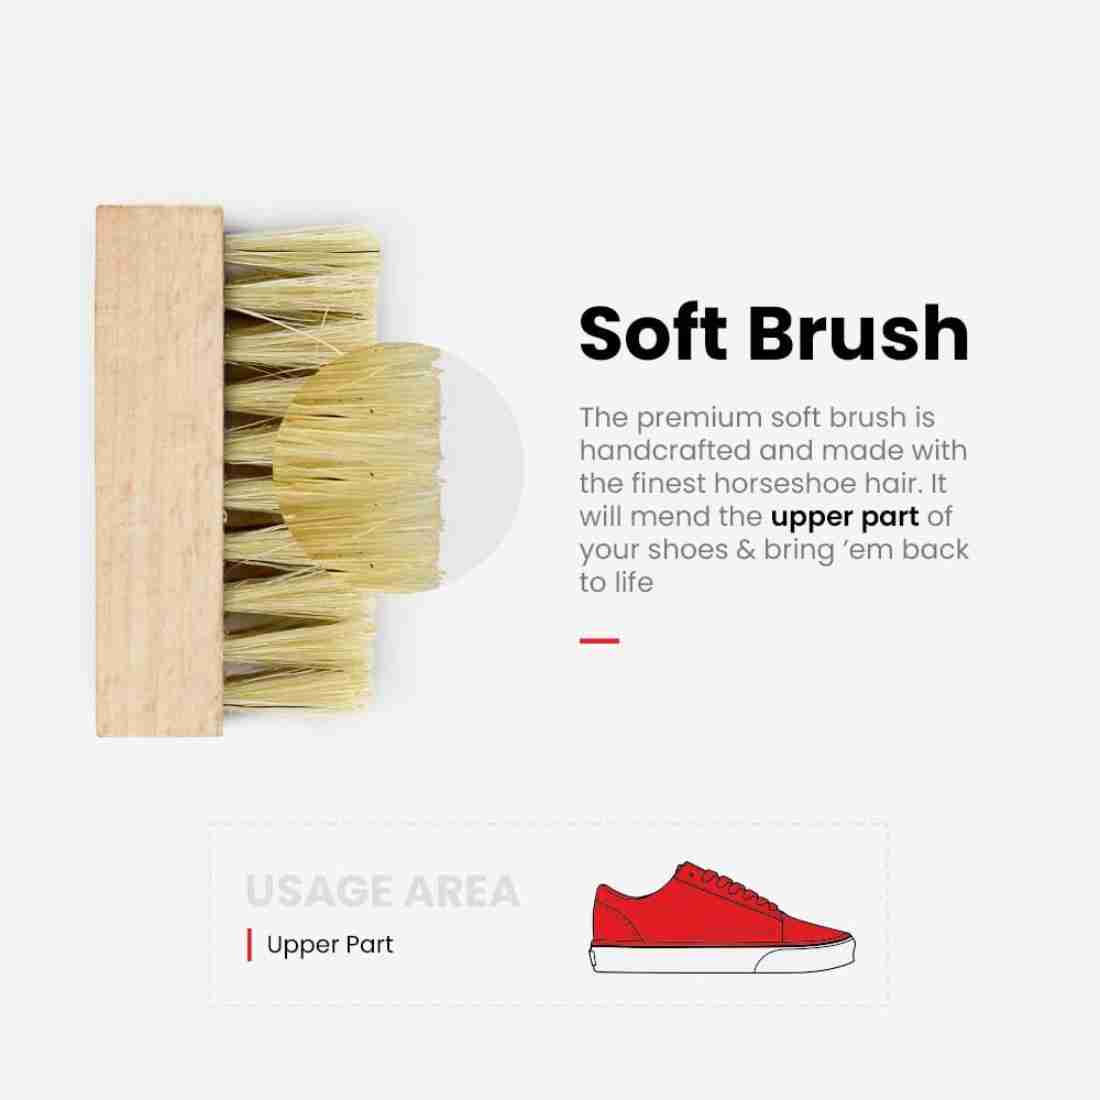 KASYBEXTR Hard Bristle Cleaning Brush with Wooden Handle for Nubuck, Brush  Price in India - Buy KASYBEXTR Hard Bristle Cleaning Brush with Wooden  Handle for Nubuck, Brush online at